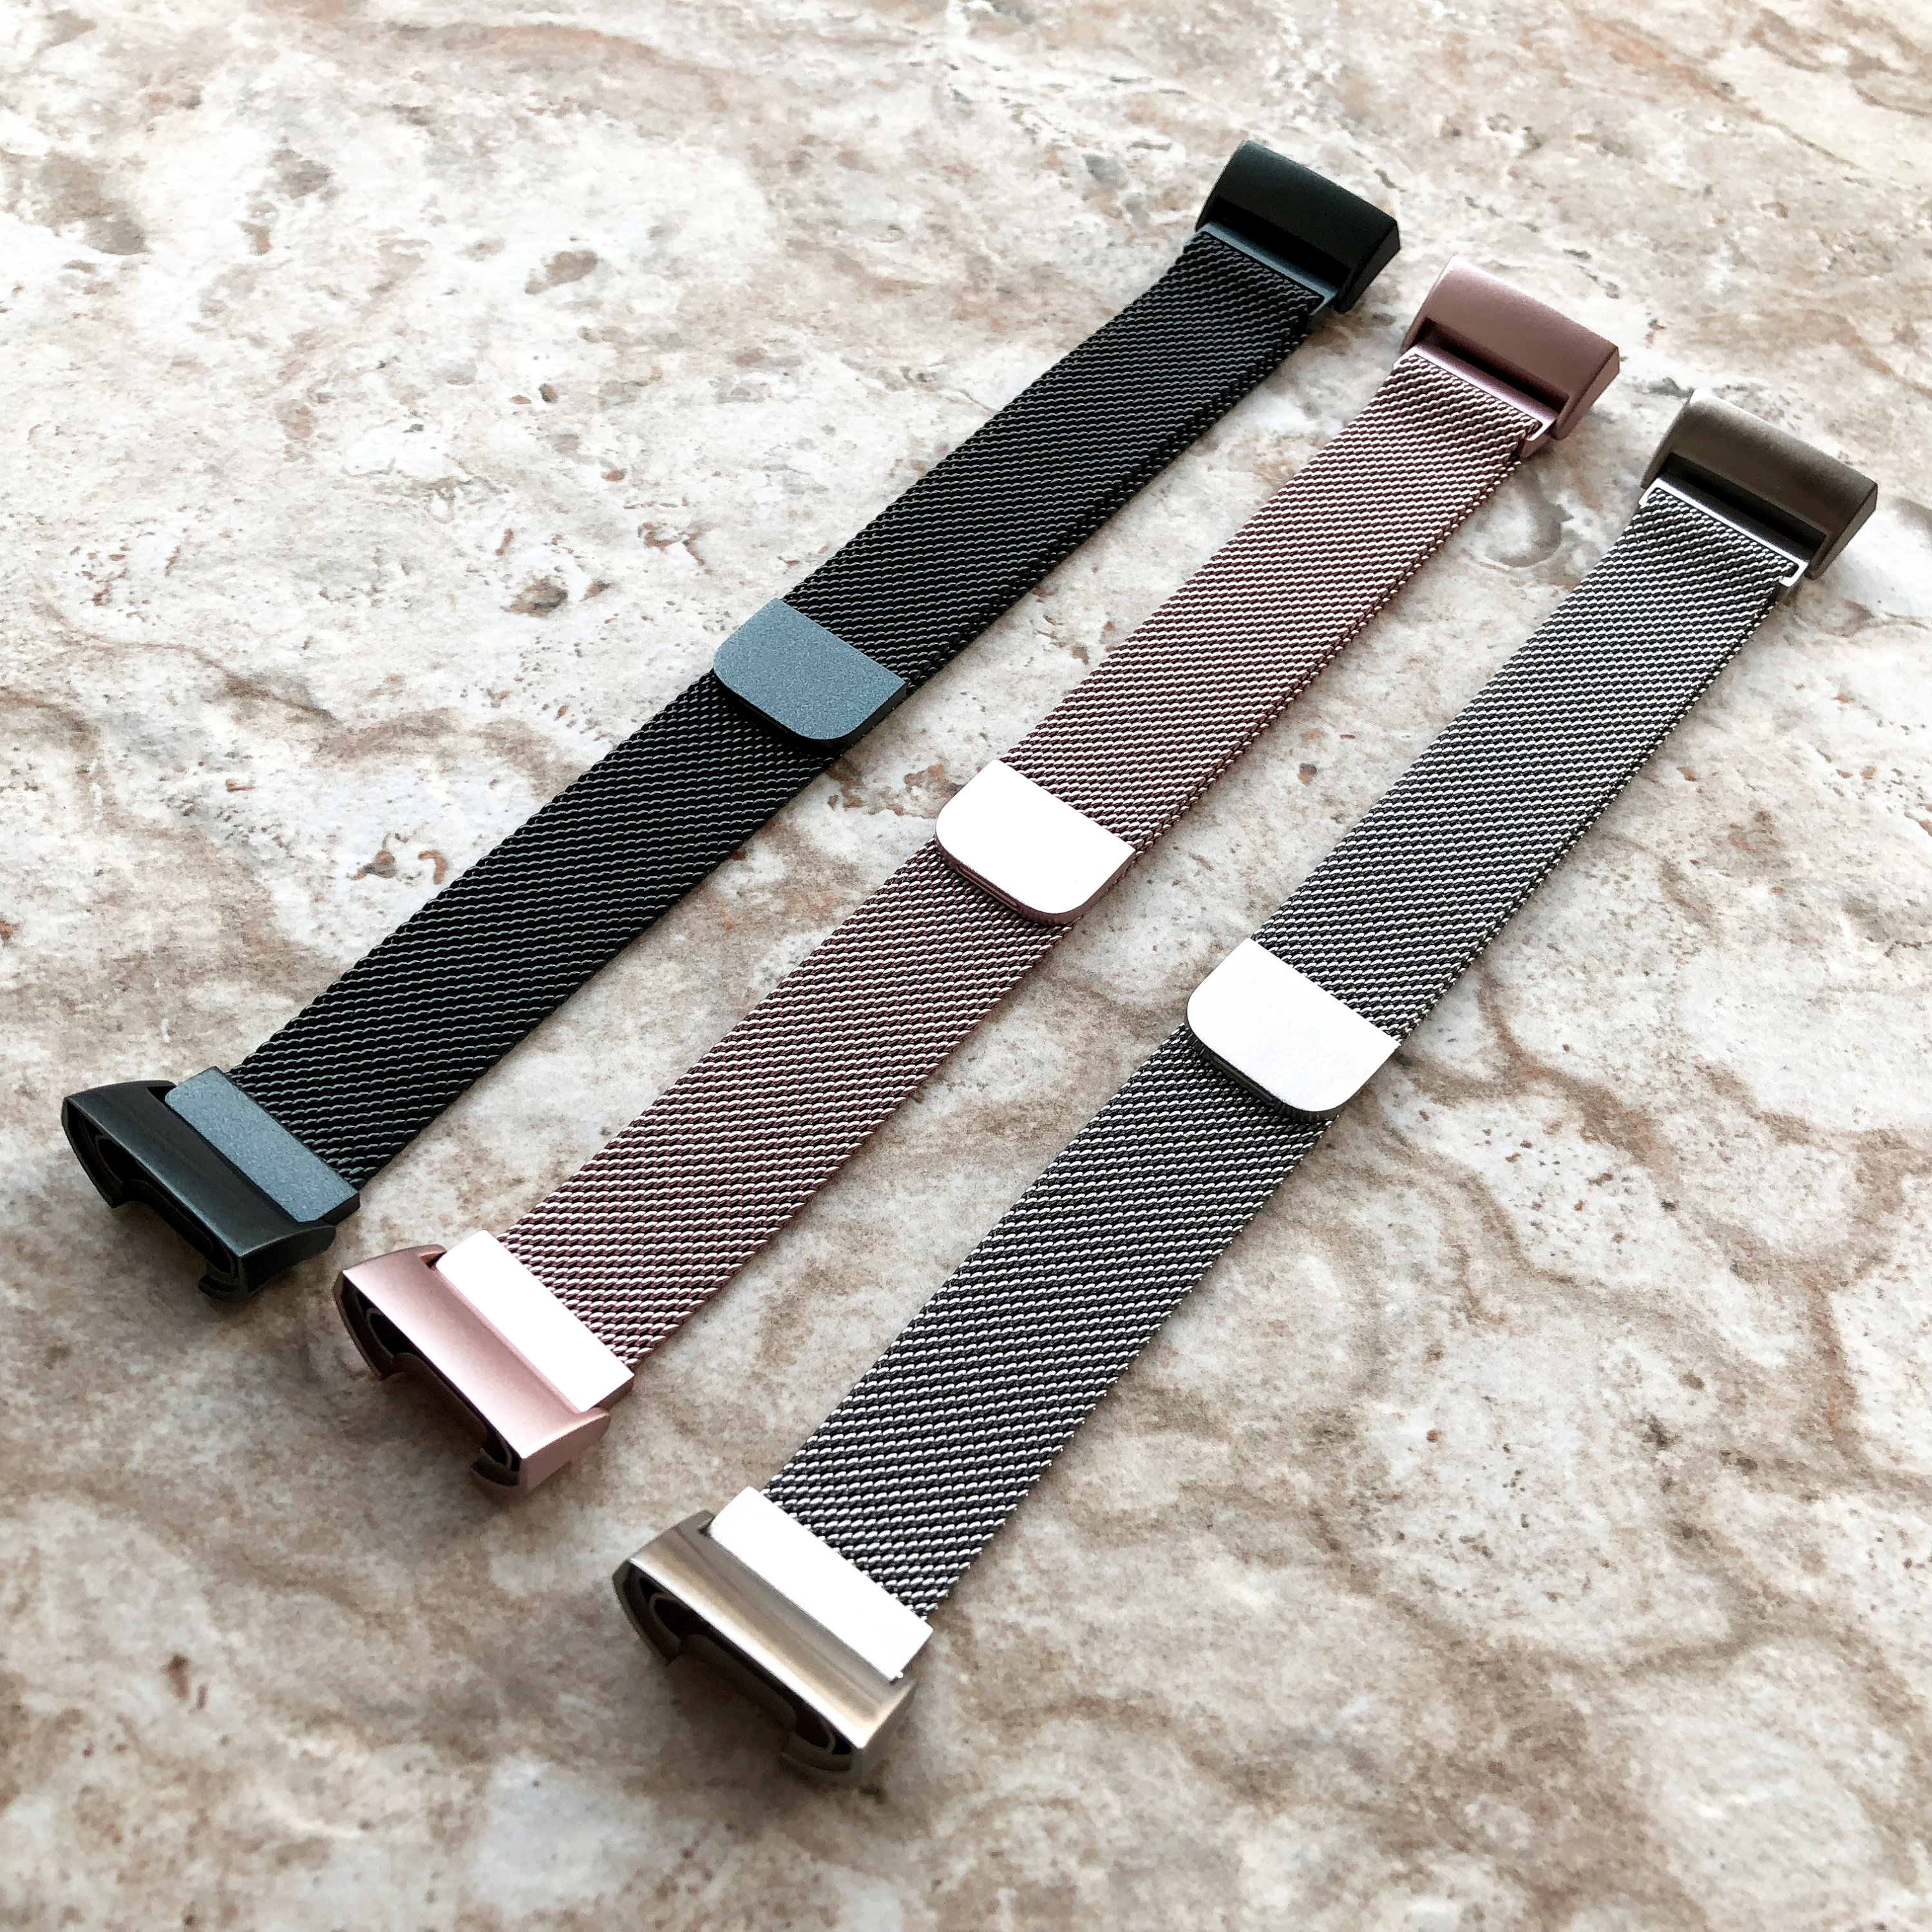 fitbit charge 3 mesh band